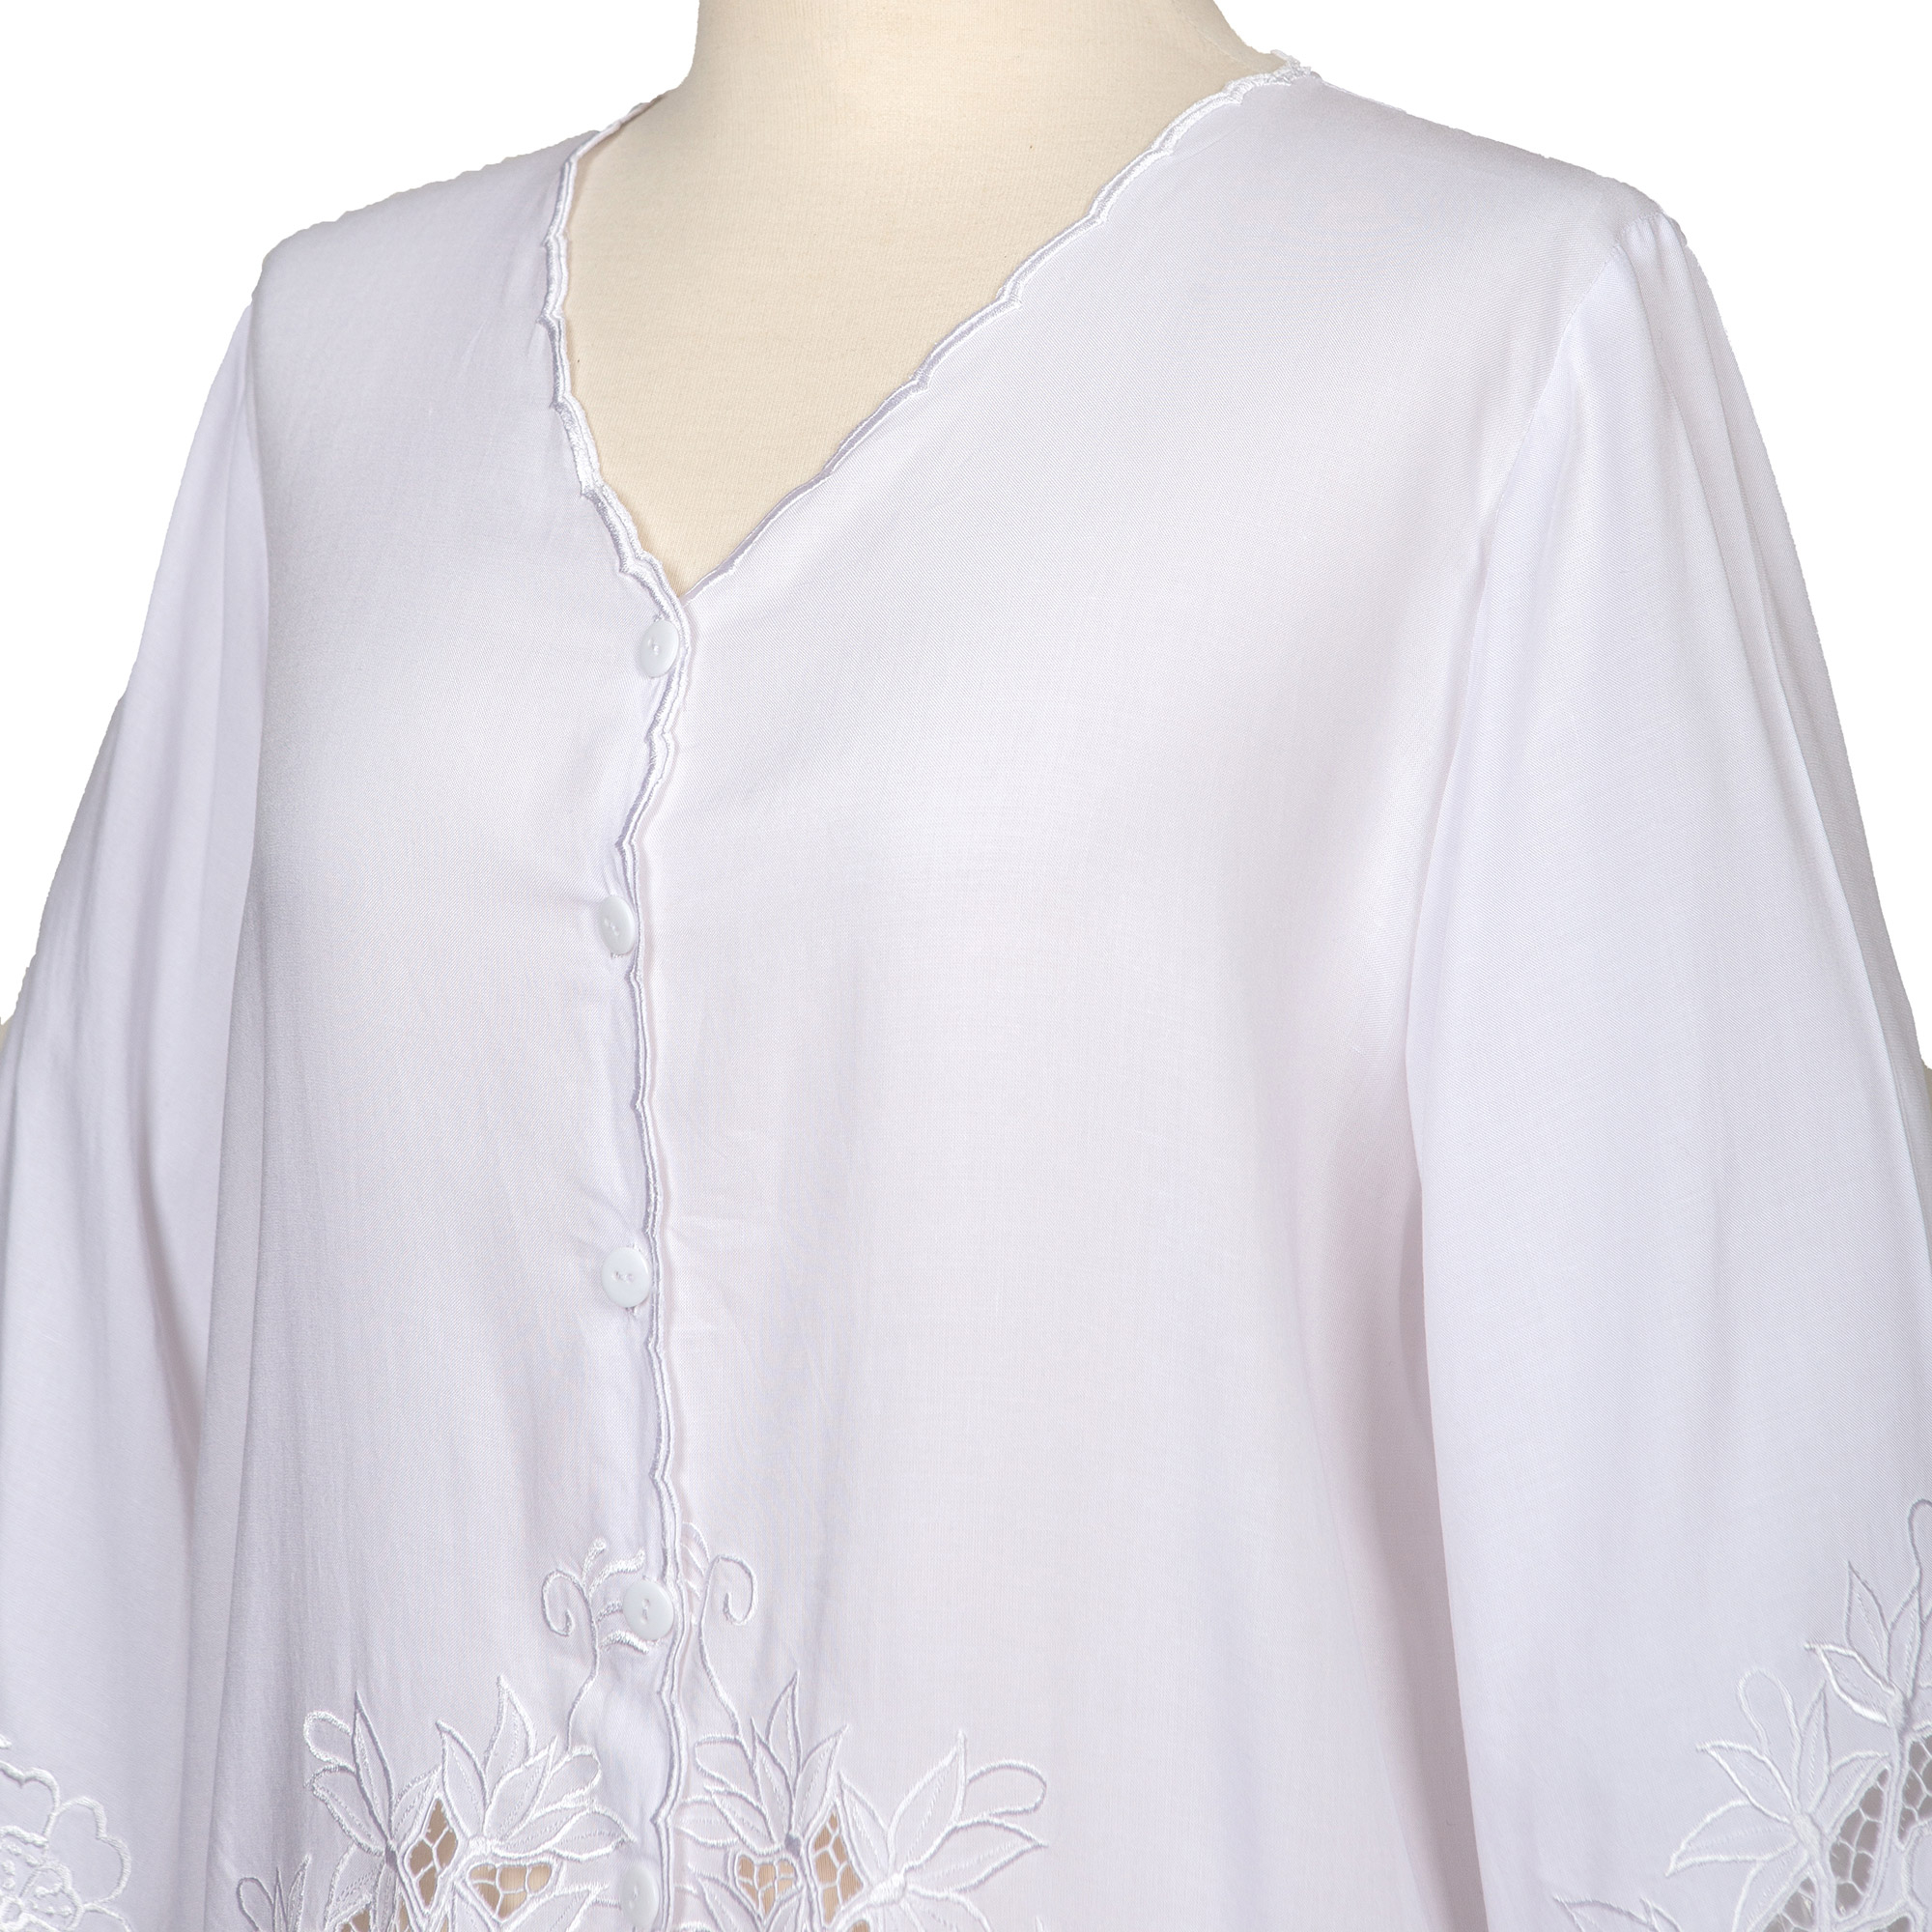 Floral Embroidered White Rayon Blouse from Bali - Blossom Delight | NOVICA